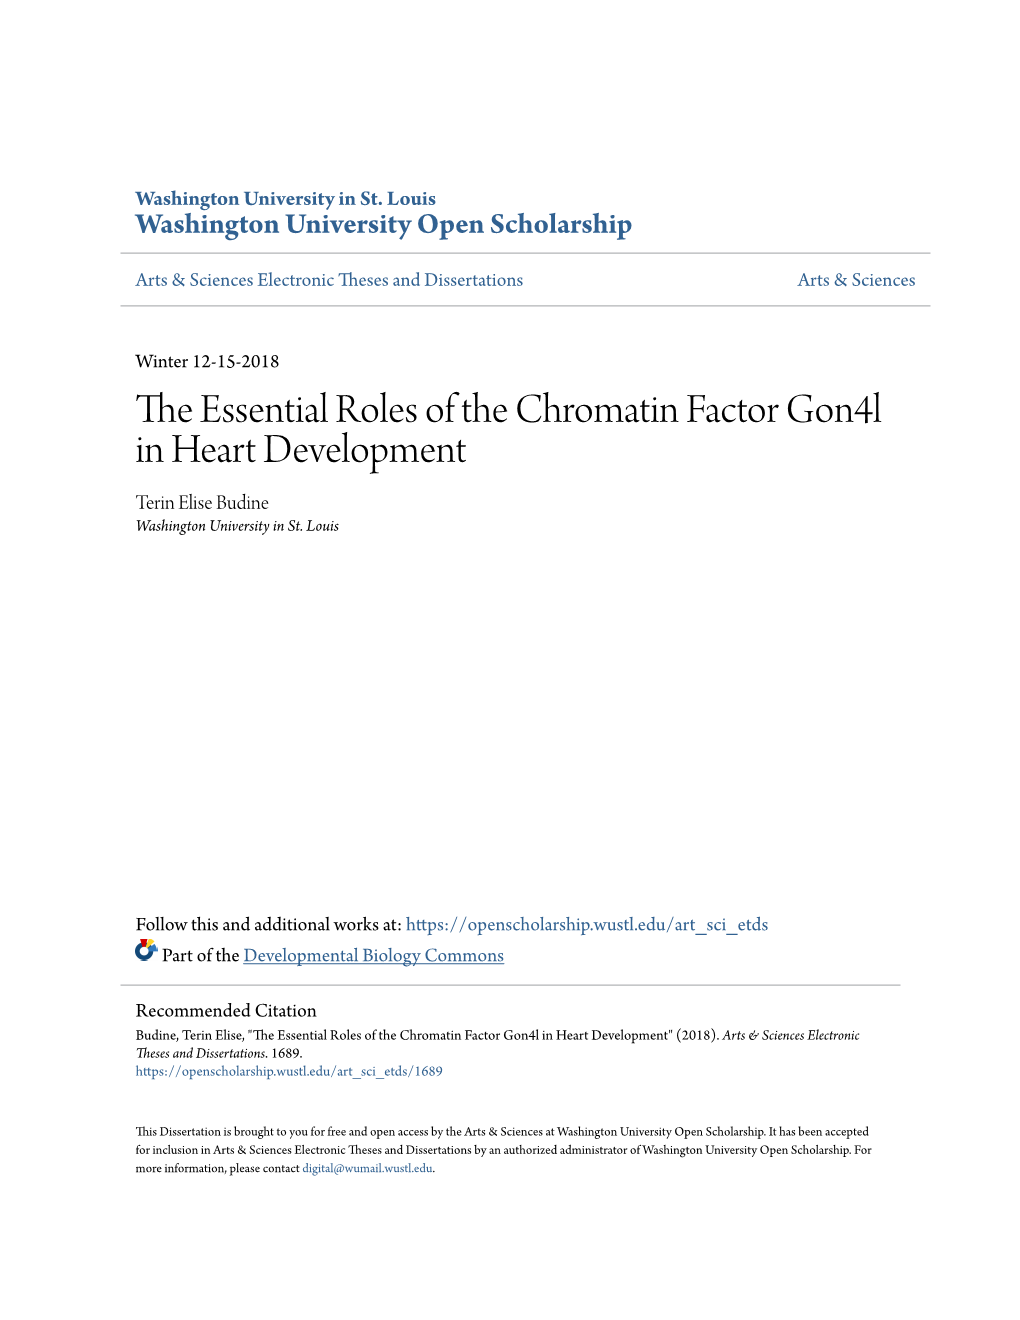 The Essential Roles of the Chromatin Factor Gon4l in Heart Development Terin Elise Budine Washington University in St